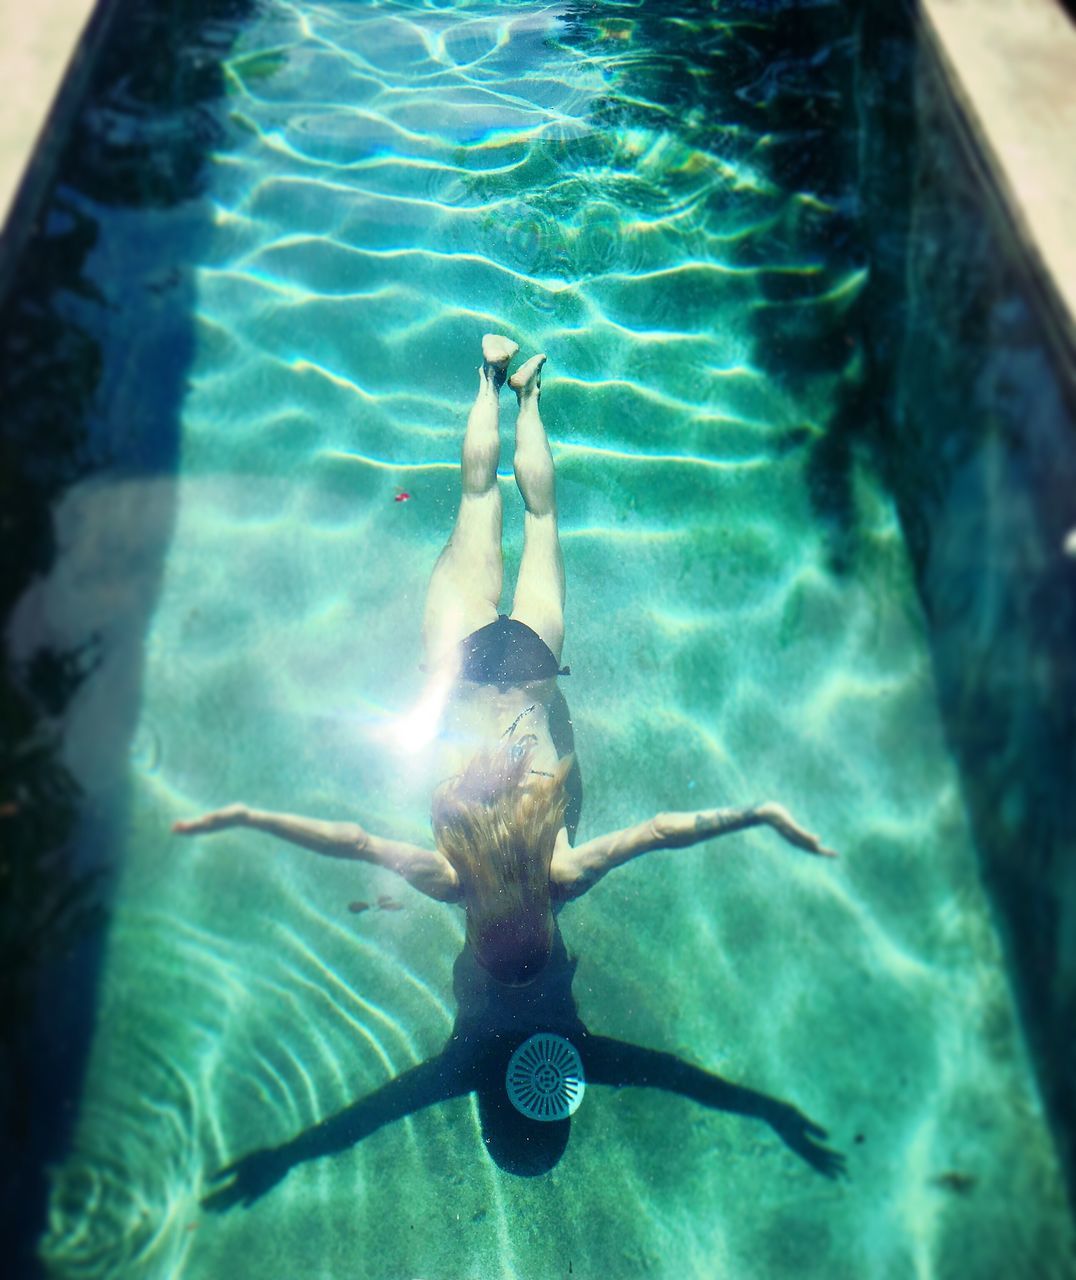 swimming pool, water, swimming, underwater, one person, high angle view, floating on water, real people, leisure activity, day, outdoors, young adult, young women, people